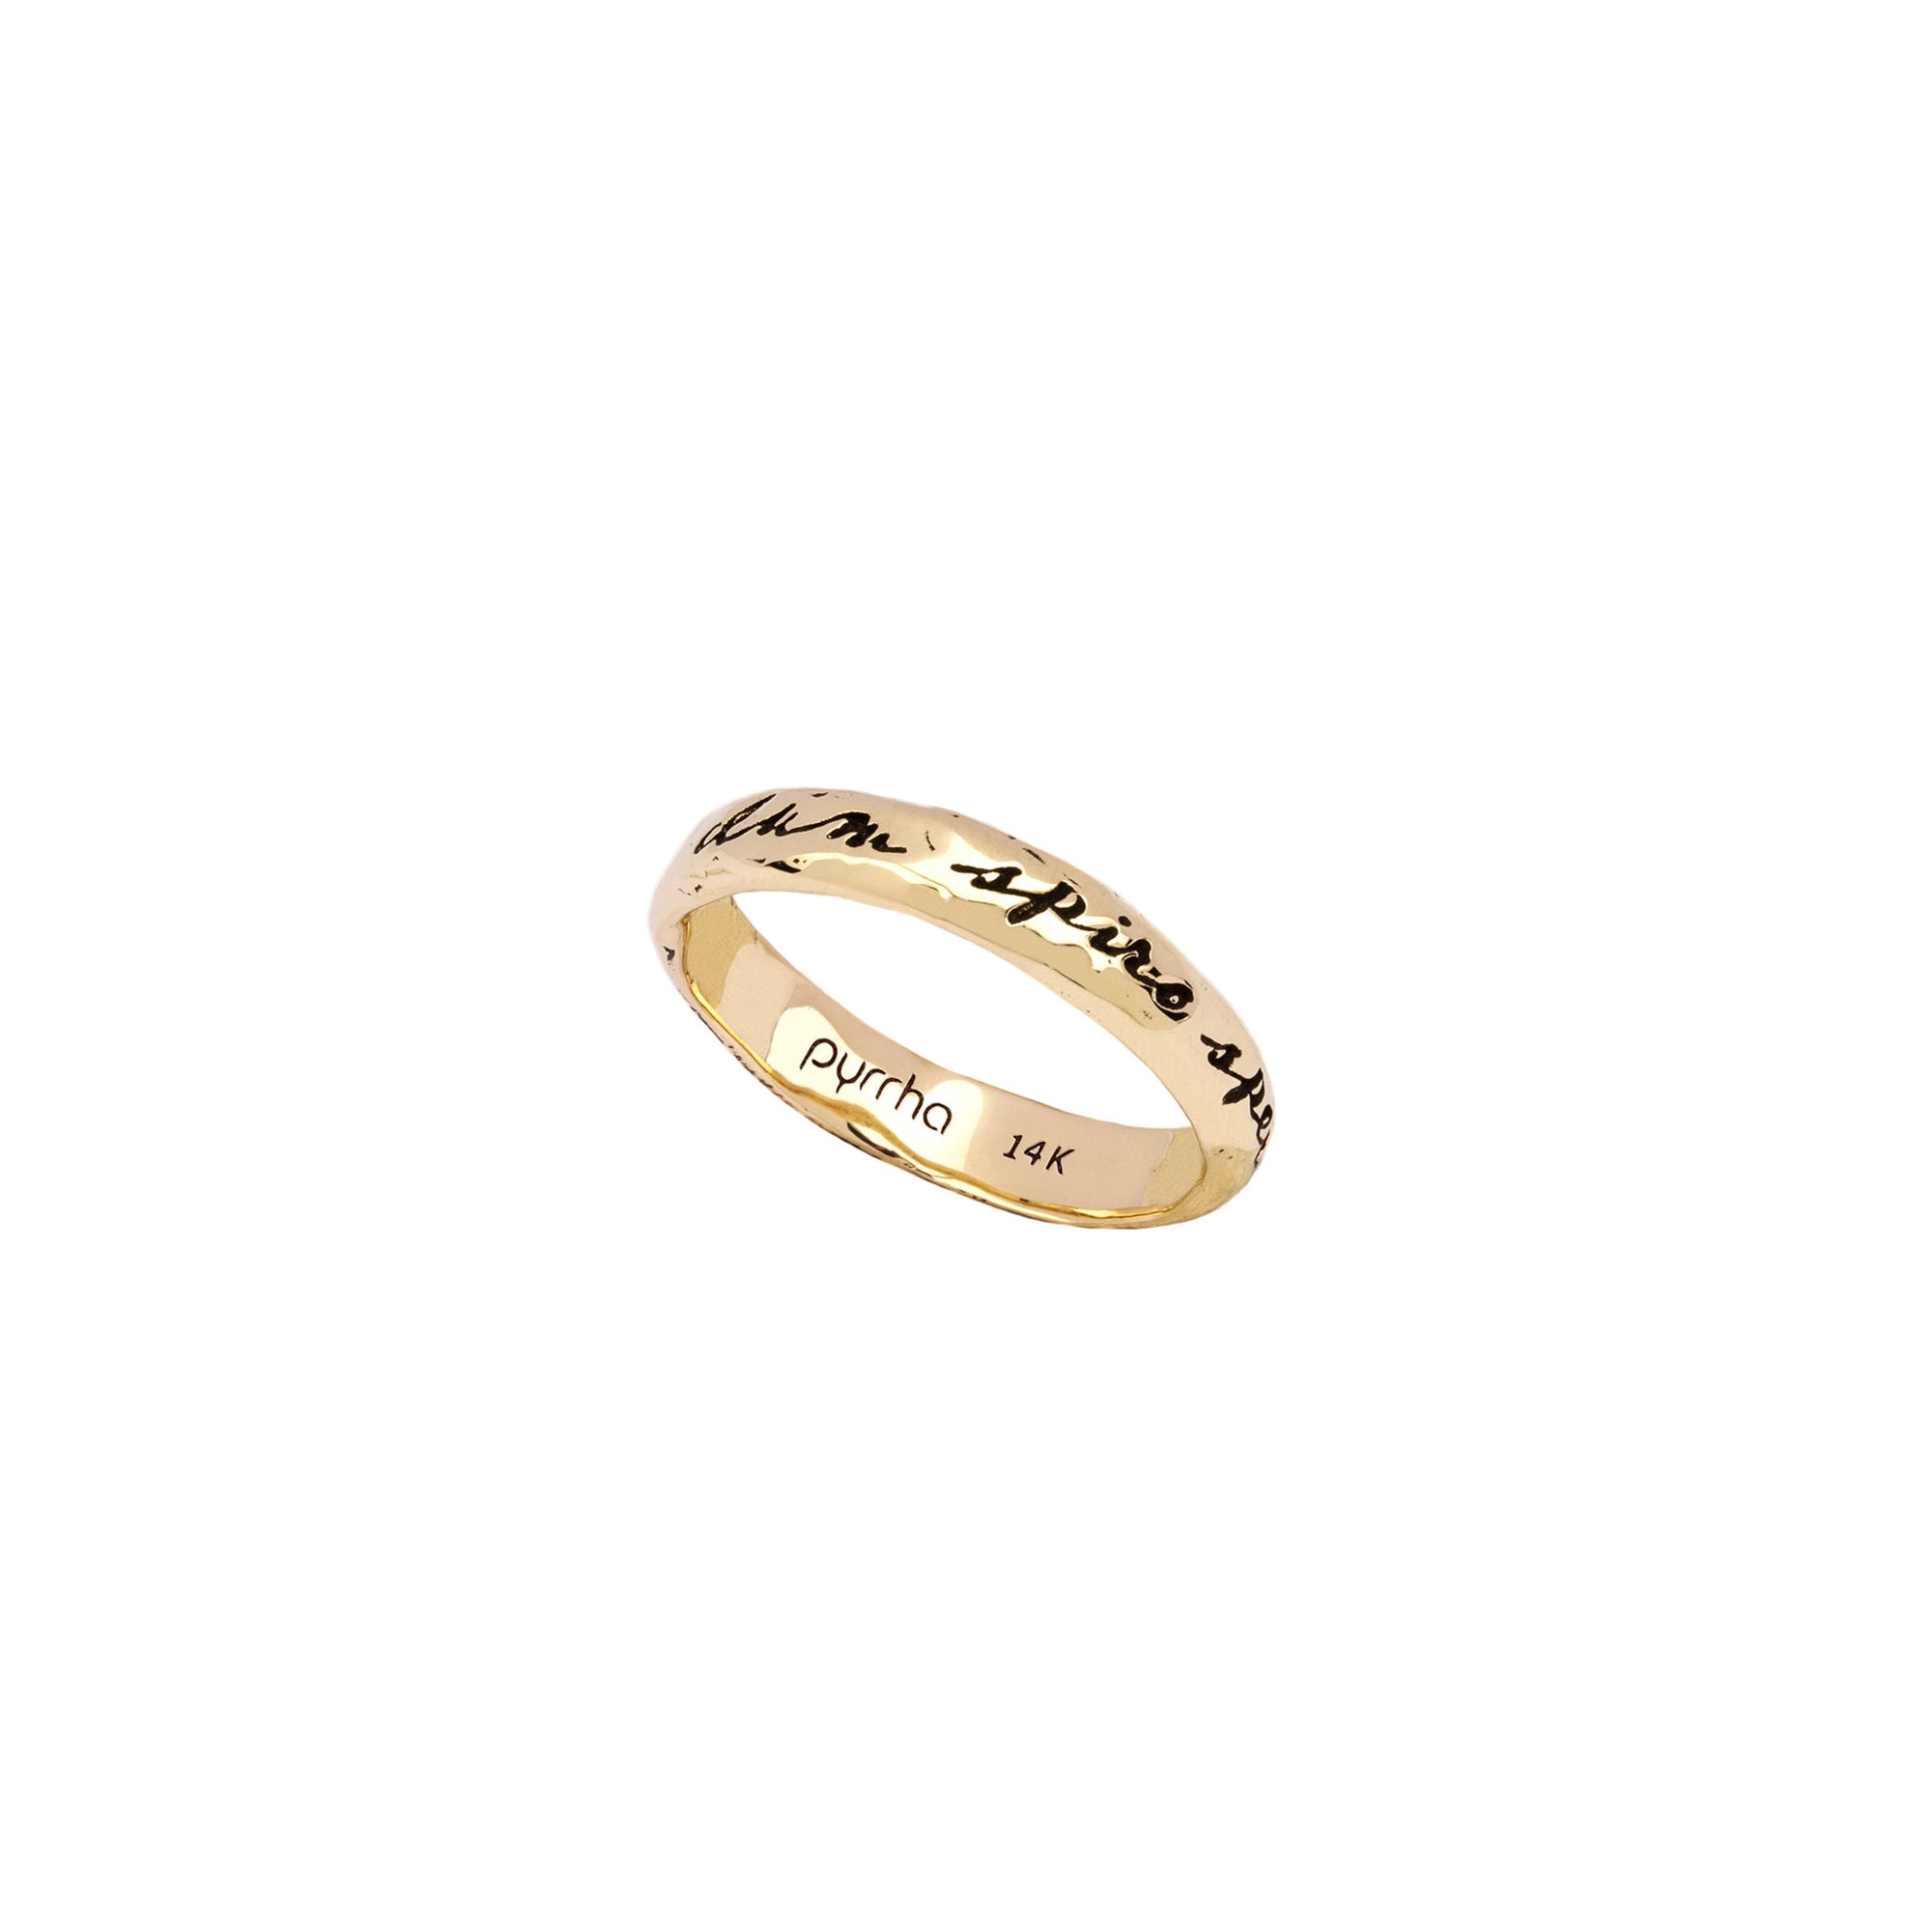 A 14k gold ring engraved with our While I Breathe I Hope motto.